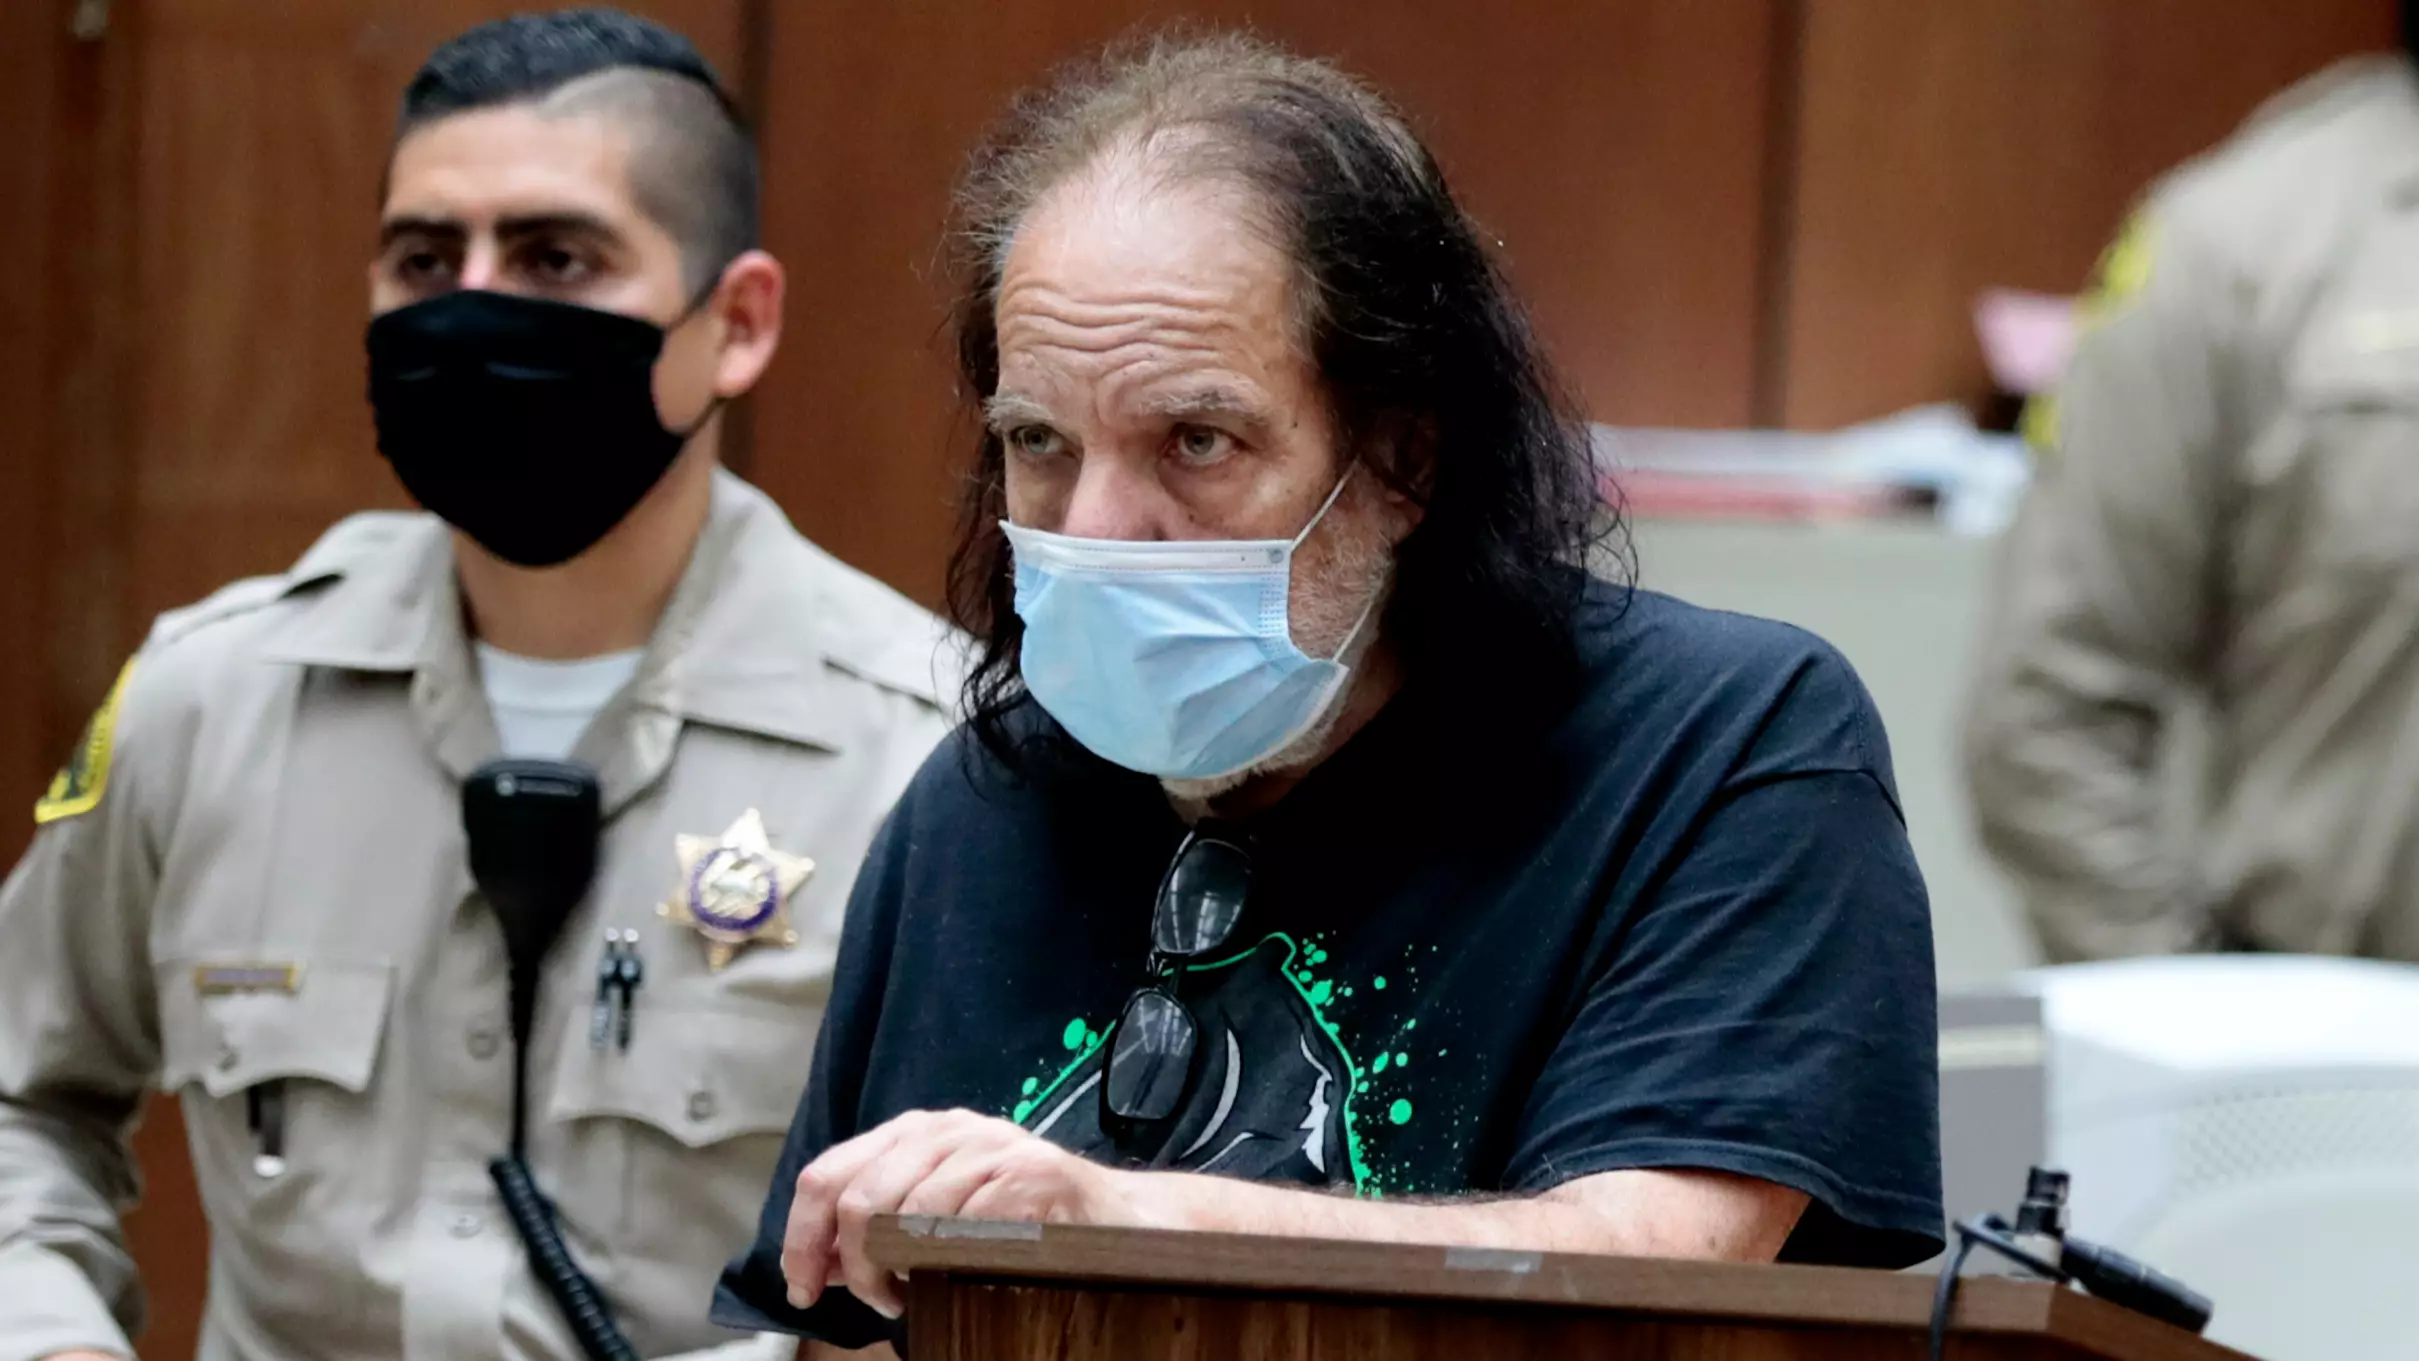 Ron Jeremy Indicted On More Than 30 Sexual Assault Charges